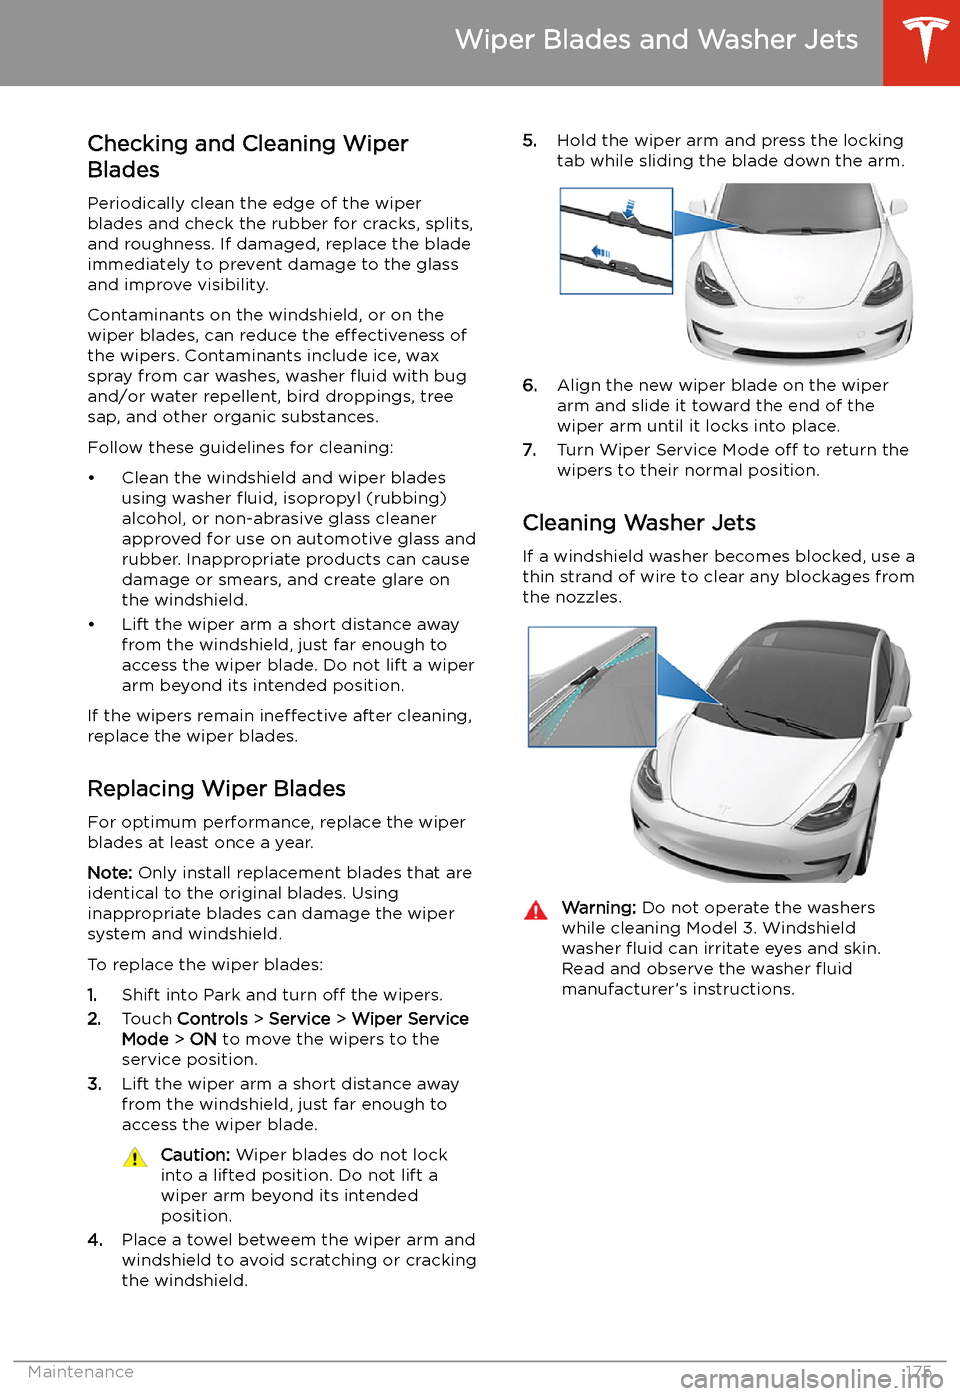 TESLA MODEL 3 2020  s Owners Guide Wiper Blades and Washer Jets
Checking and Cleaning Wiper
Blades
Periodically clean the edge of the wiper
blades and check the rubber for cracks, splits, and roughness. If damaged, replace the bladeimm